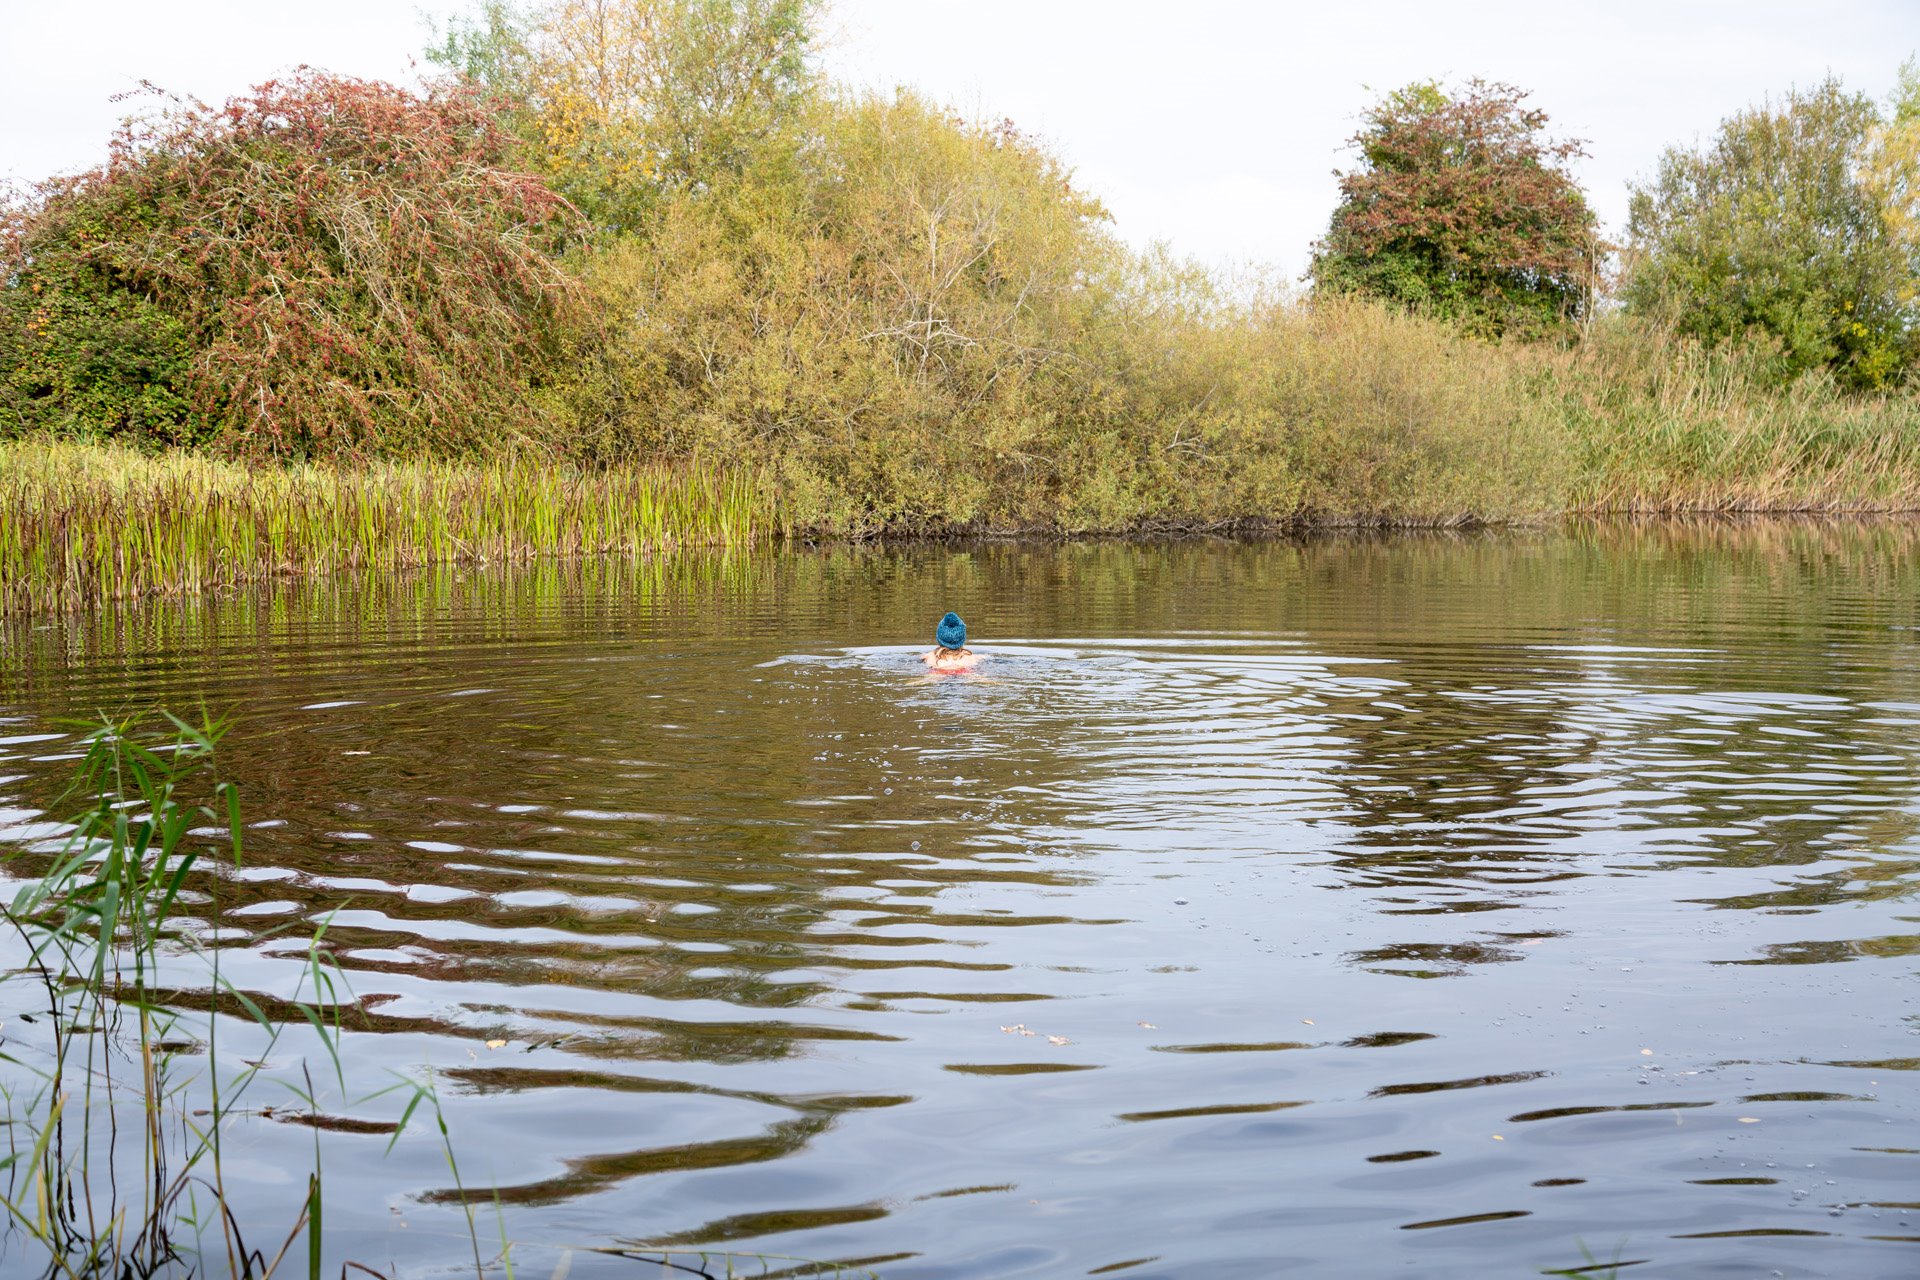 Wild swimming at a secret spot in the cotswolds at rewilded wedding venue elmore court